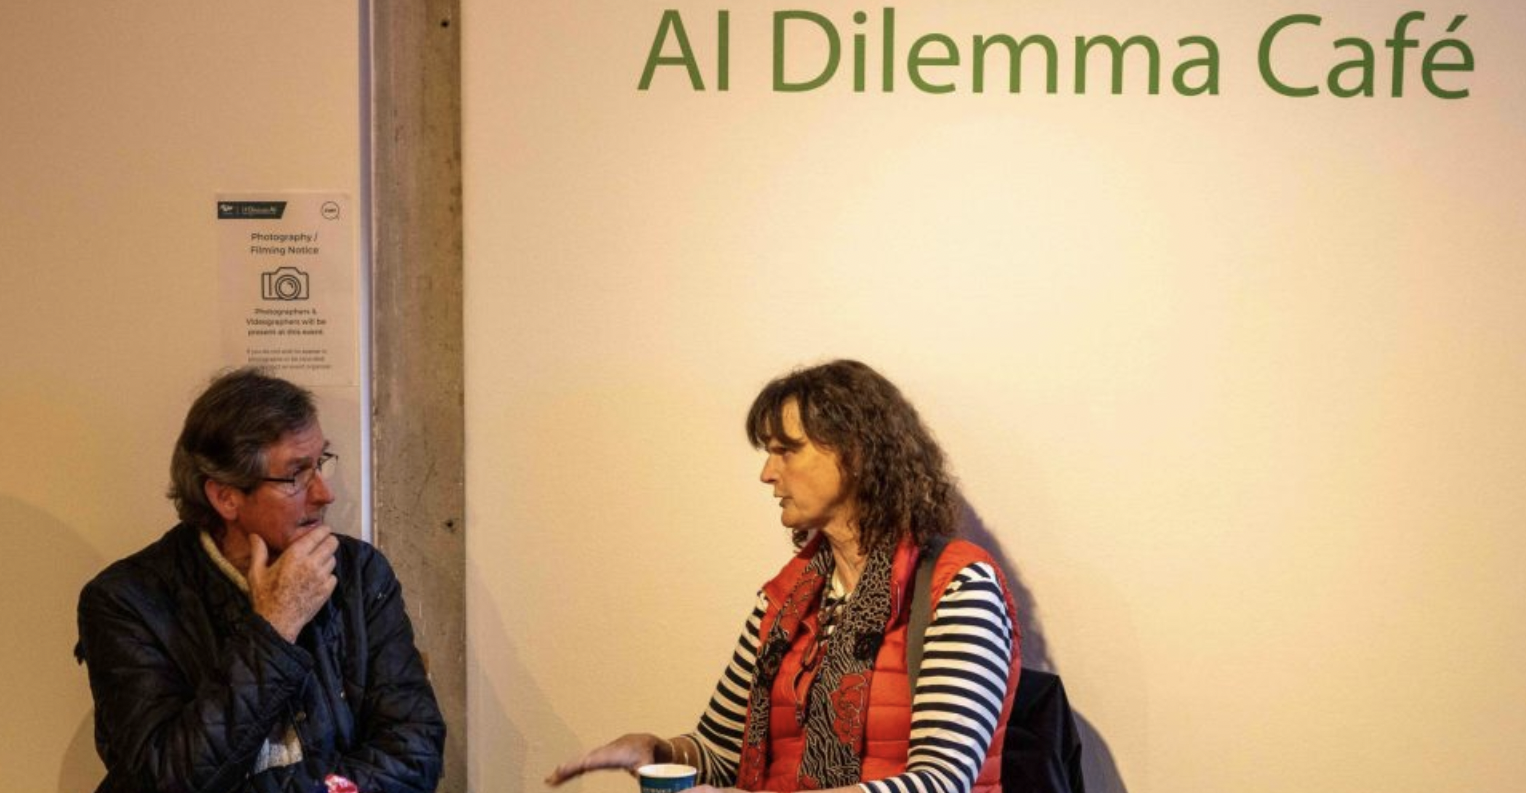 Two people are sitting and having a discussion at the "AI Dilemma Café." at European Researchers' Night 2023 at the Douglas Hyde Gallery, Trinity College Dublin. The person on the left is an older man with glasses, wearing a dark jacket and a thoughtful expression, with his hand near his chin. The person on the right is a woman with curly hair, dressed in a red vest over a striped shirt, gesturing with her hands as she speaks. There is a sign on the wall that mentions photography and videography at the event.